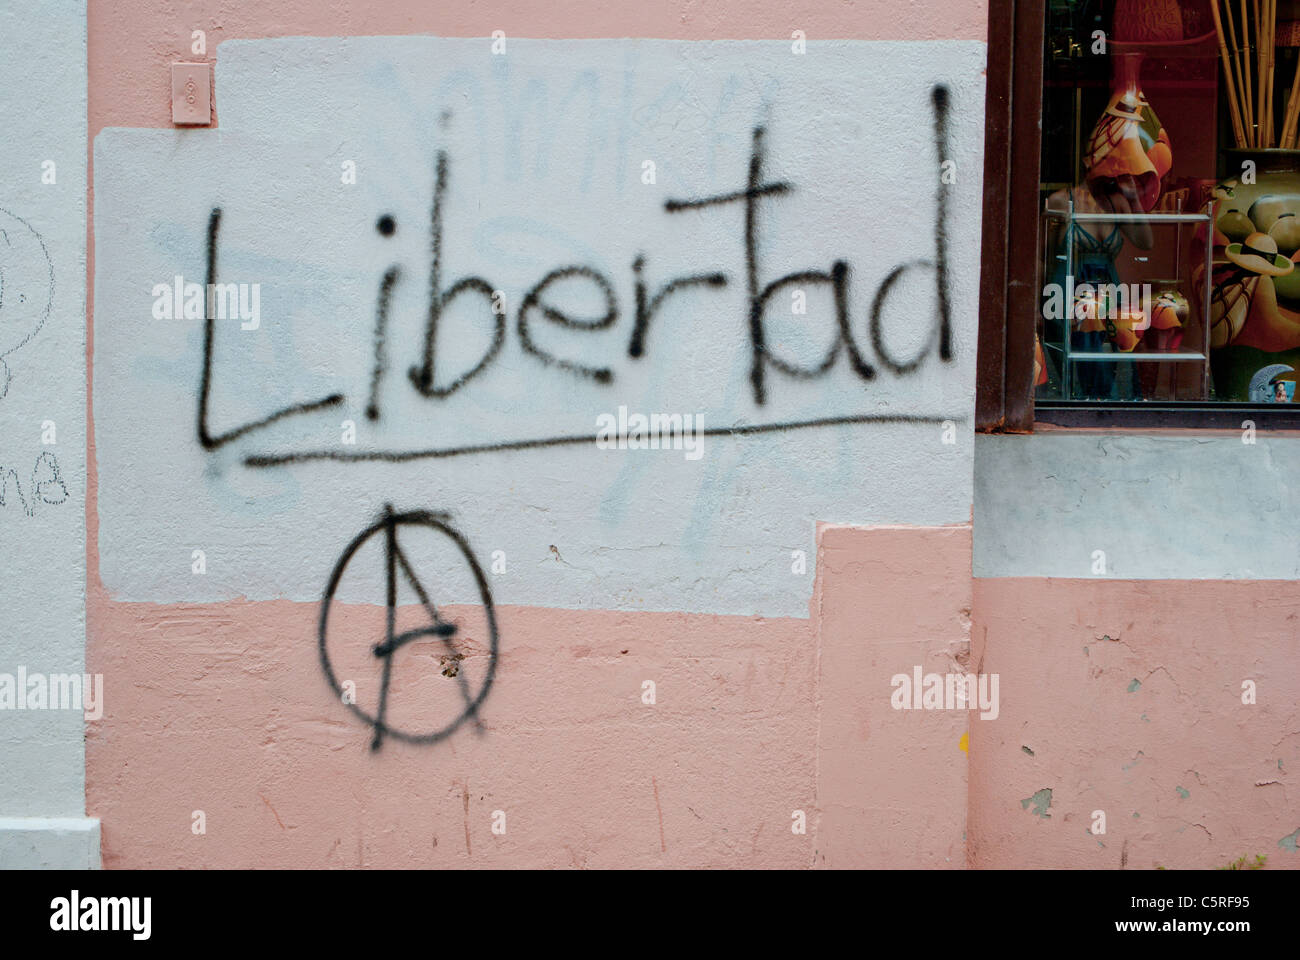 The word 'libertad' painted on the wall of the building in Old San Juan. Stock Photo